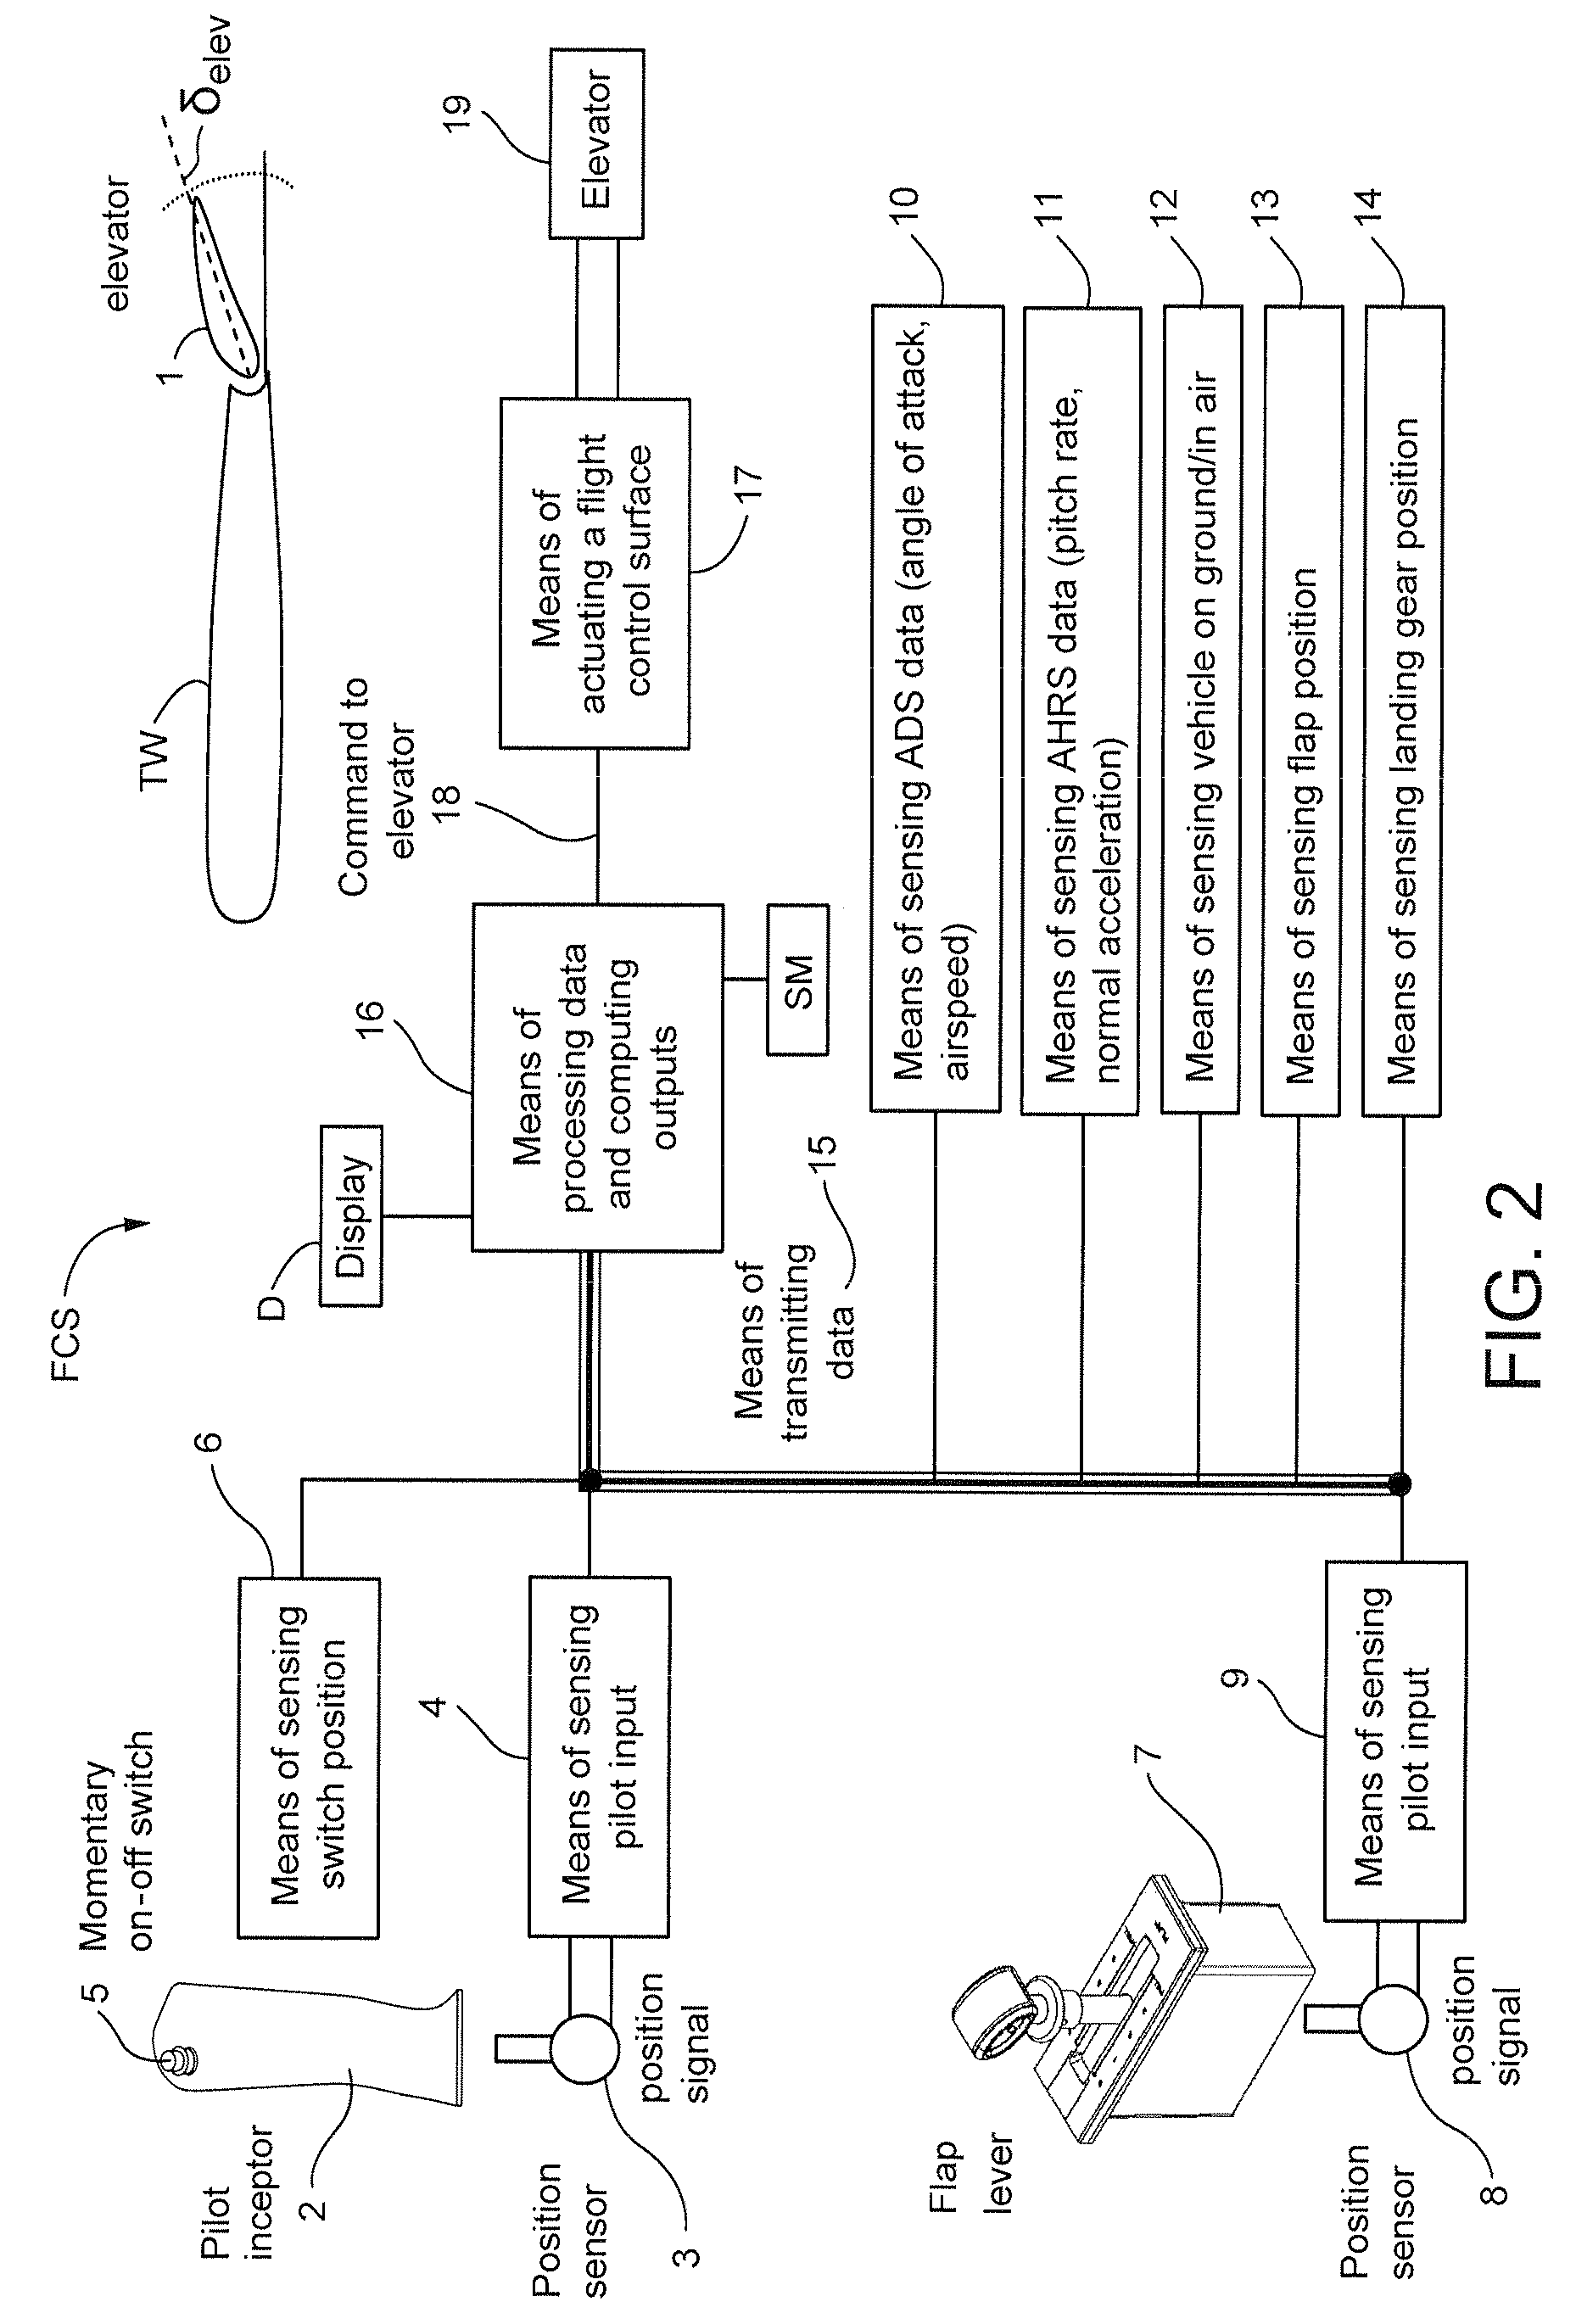 Flight control system mode and method providing aircraft speed control through the usage of momentary on-off control